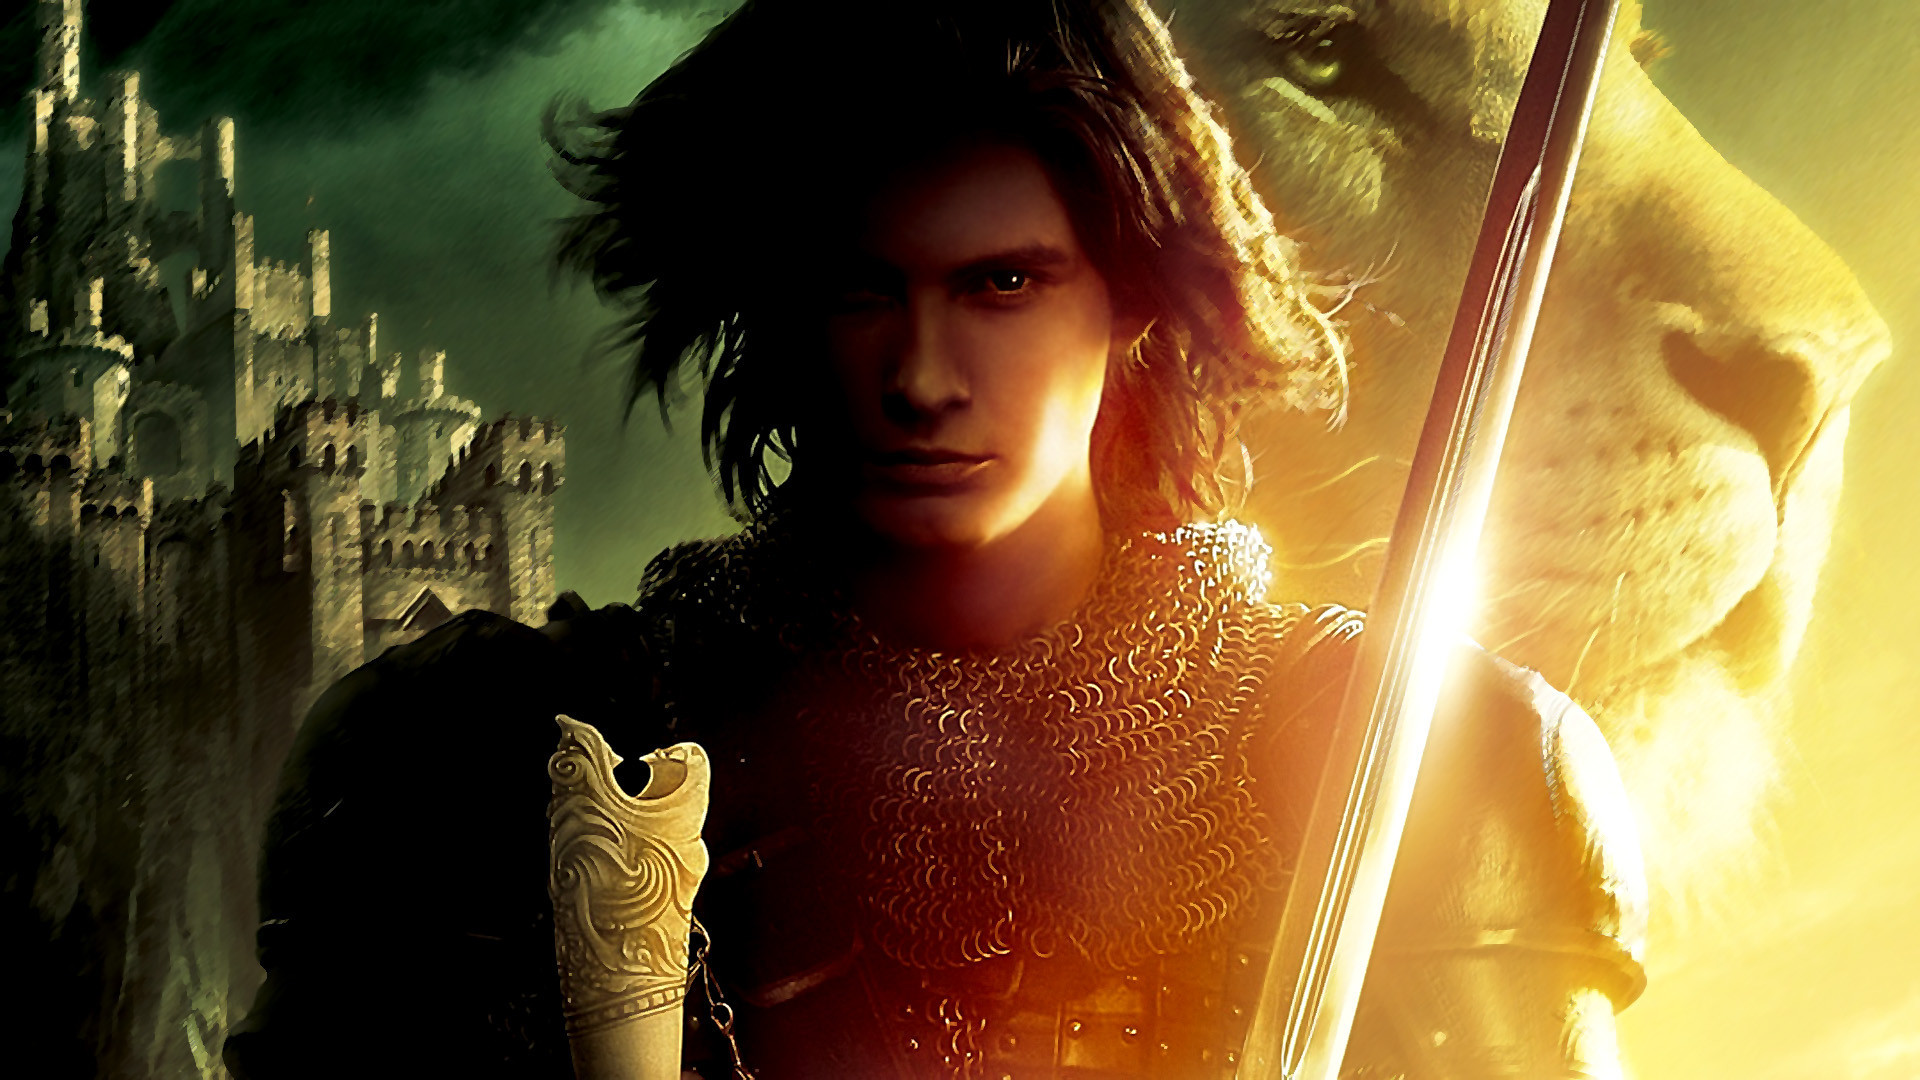 chronicles-of-narnia-prince-caspian-wallpapers-hd-desktop-and-mobile-backgrounds